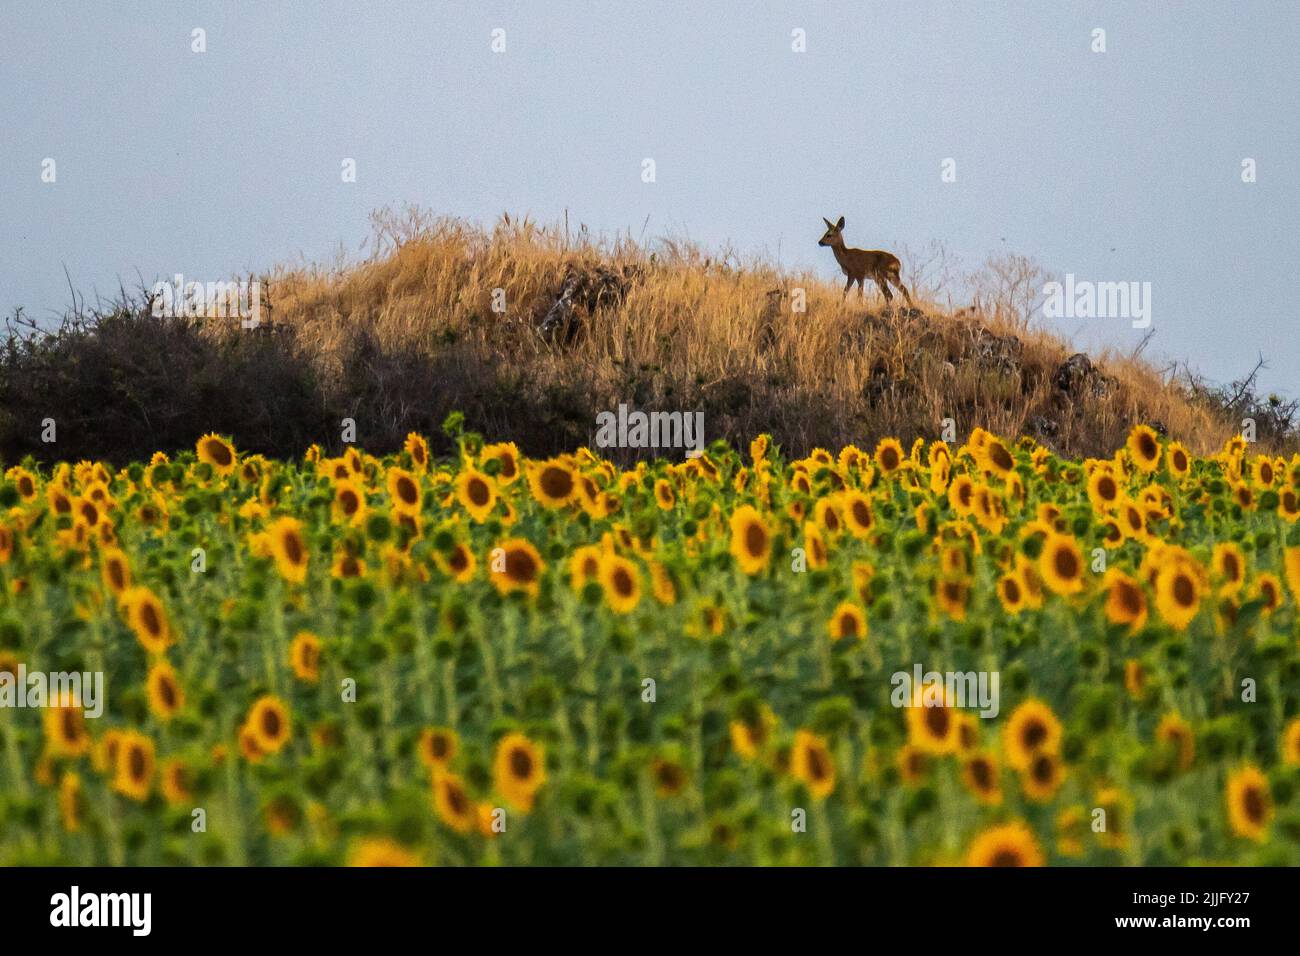 A roe deer is seen in a field of sunflowers during a summer day. Stock Photo